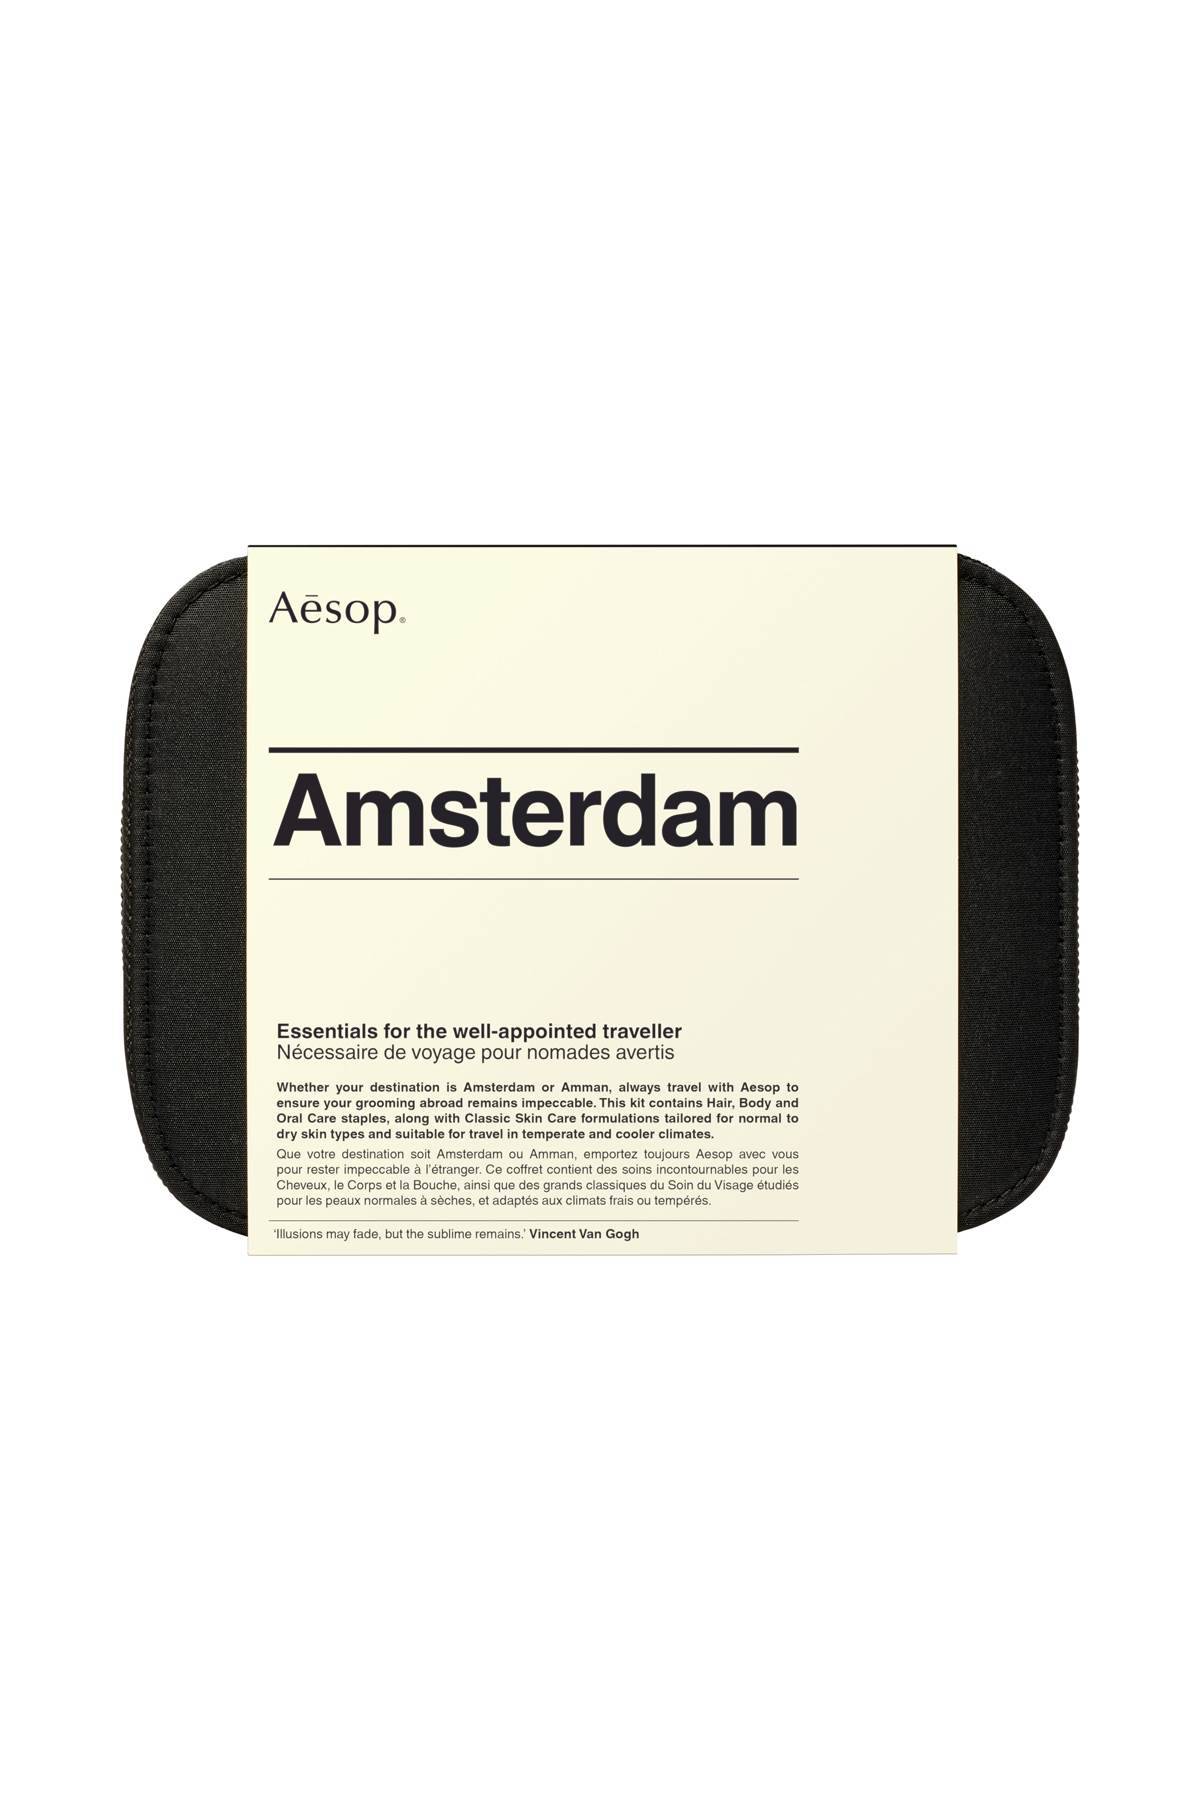 Aesop AESOP amsterdam essentials for the well-appointed traveller - 10ml 3x15ml 5x50ml